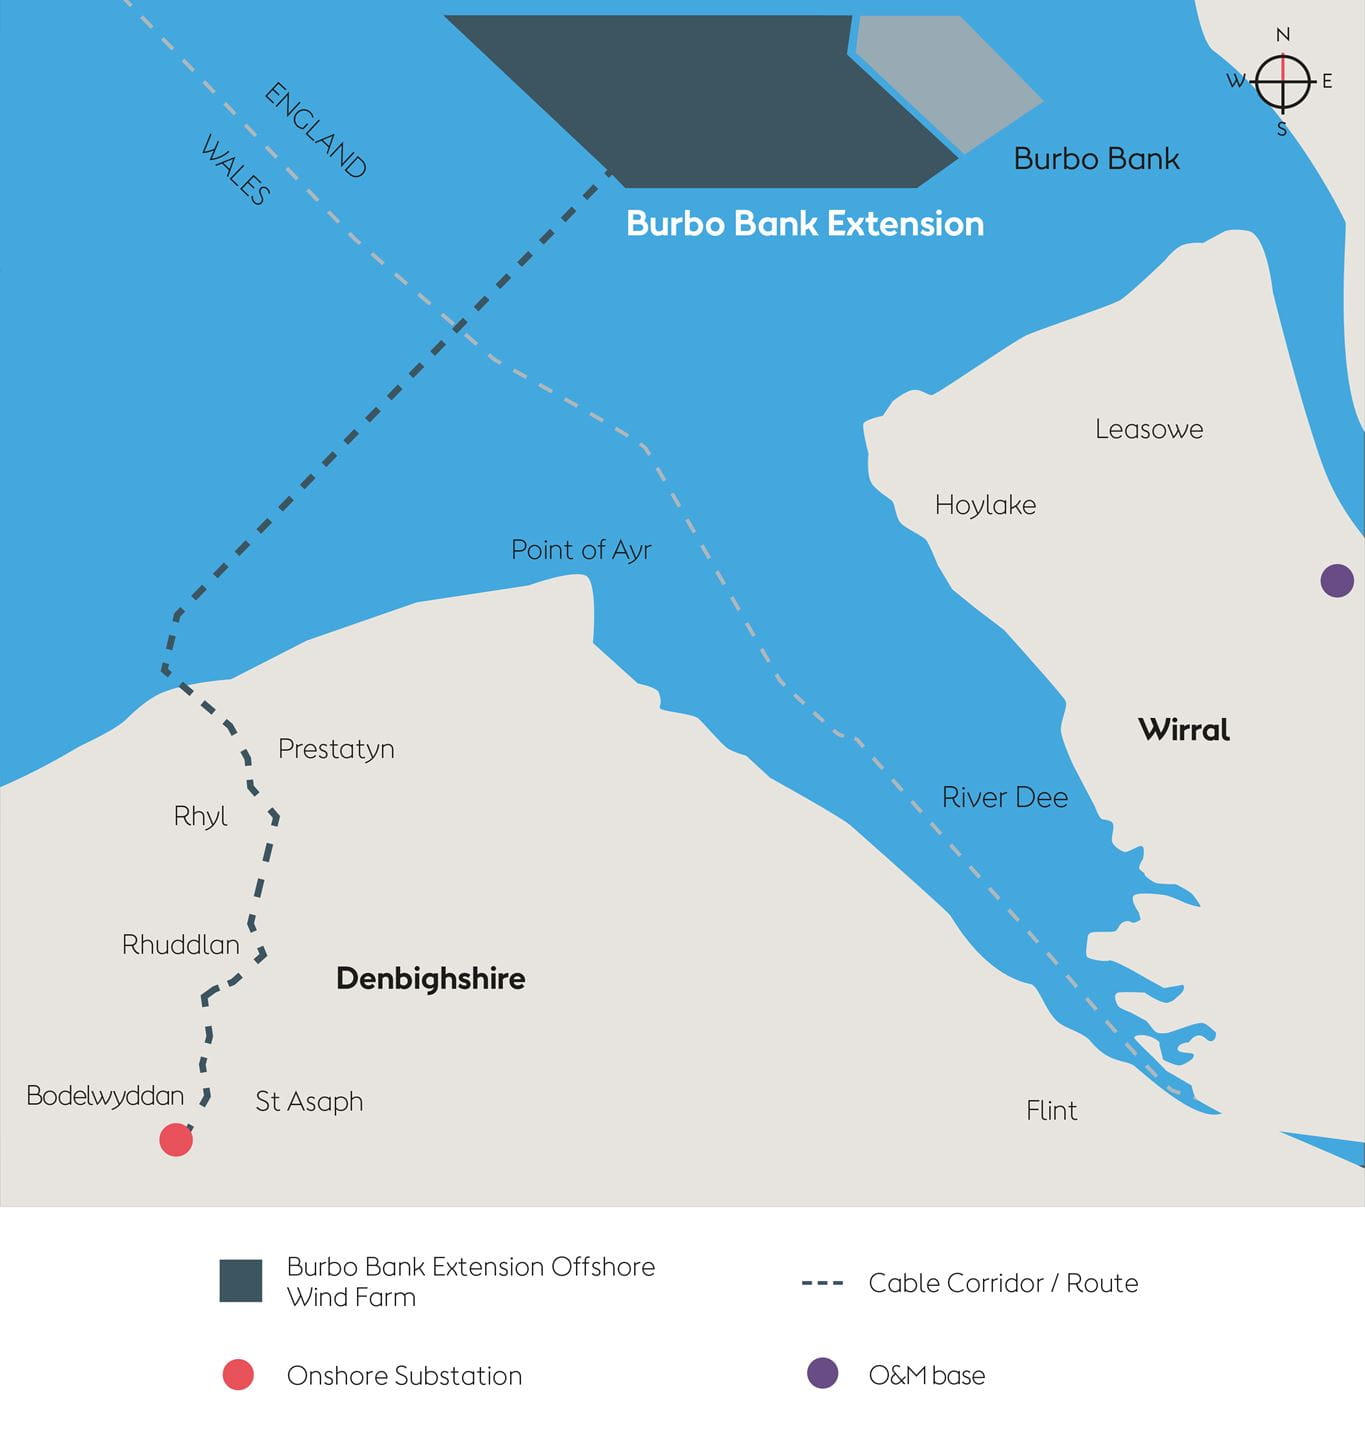 Map showing the location of Burbo Bank Extension Offshore Wind Farm.